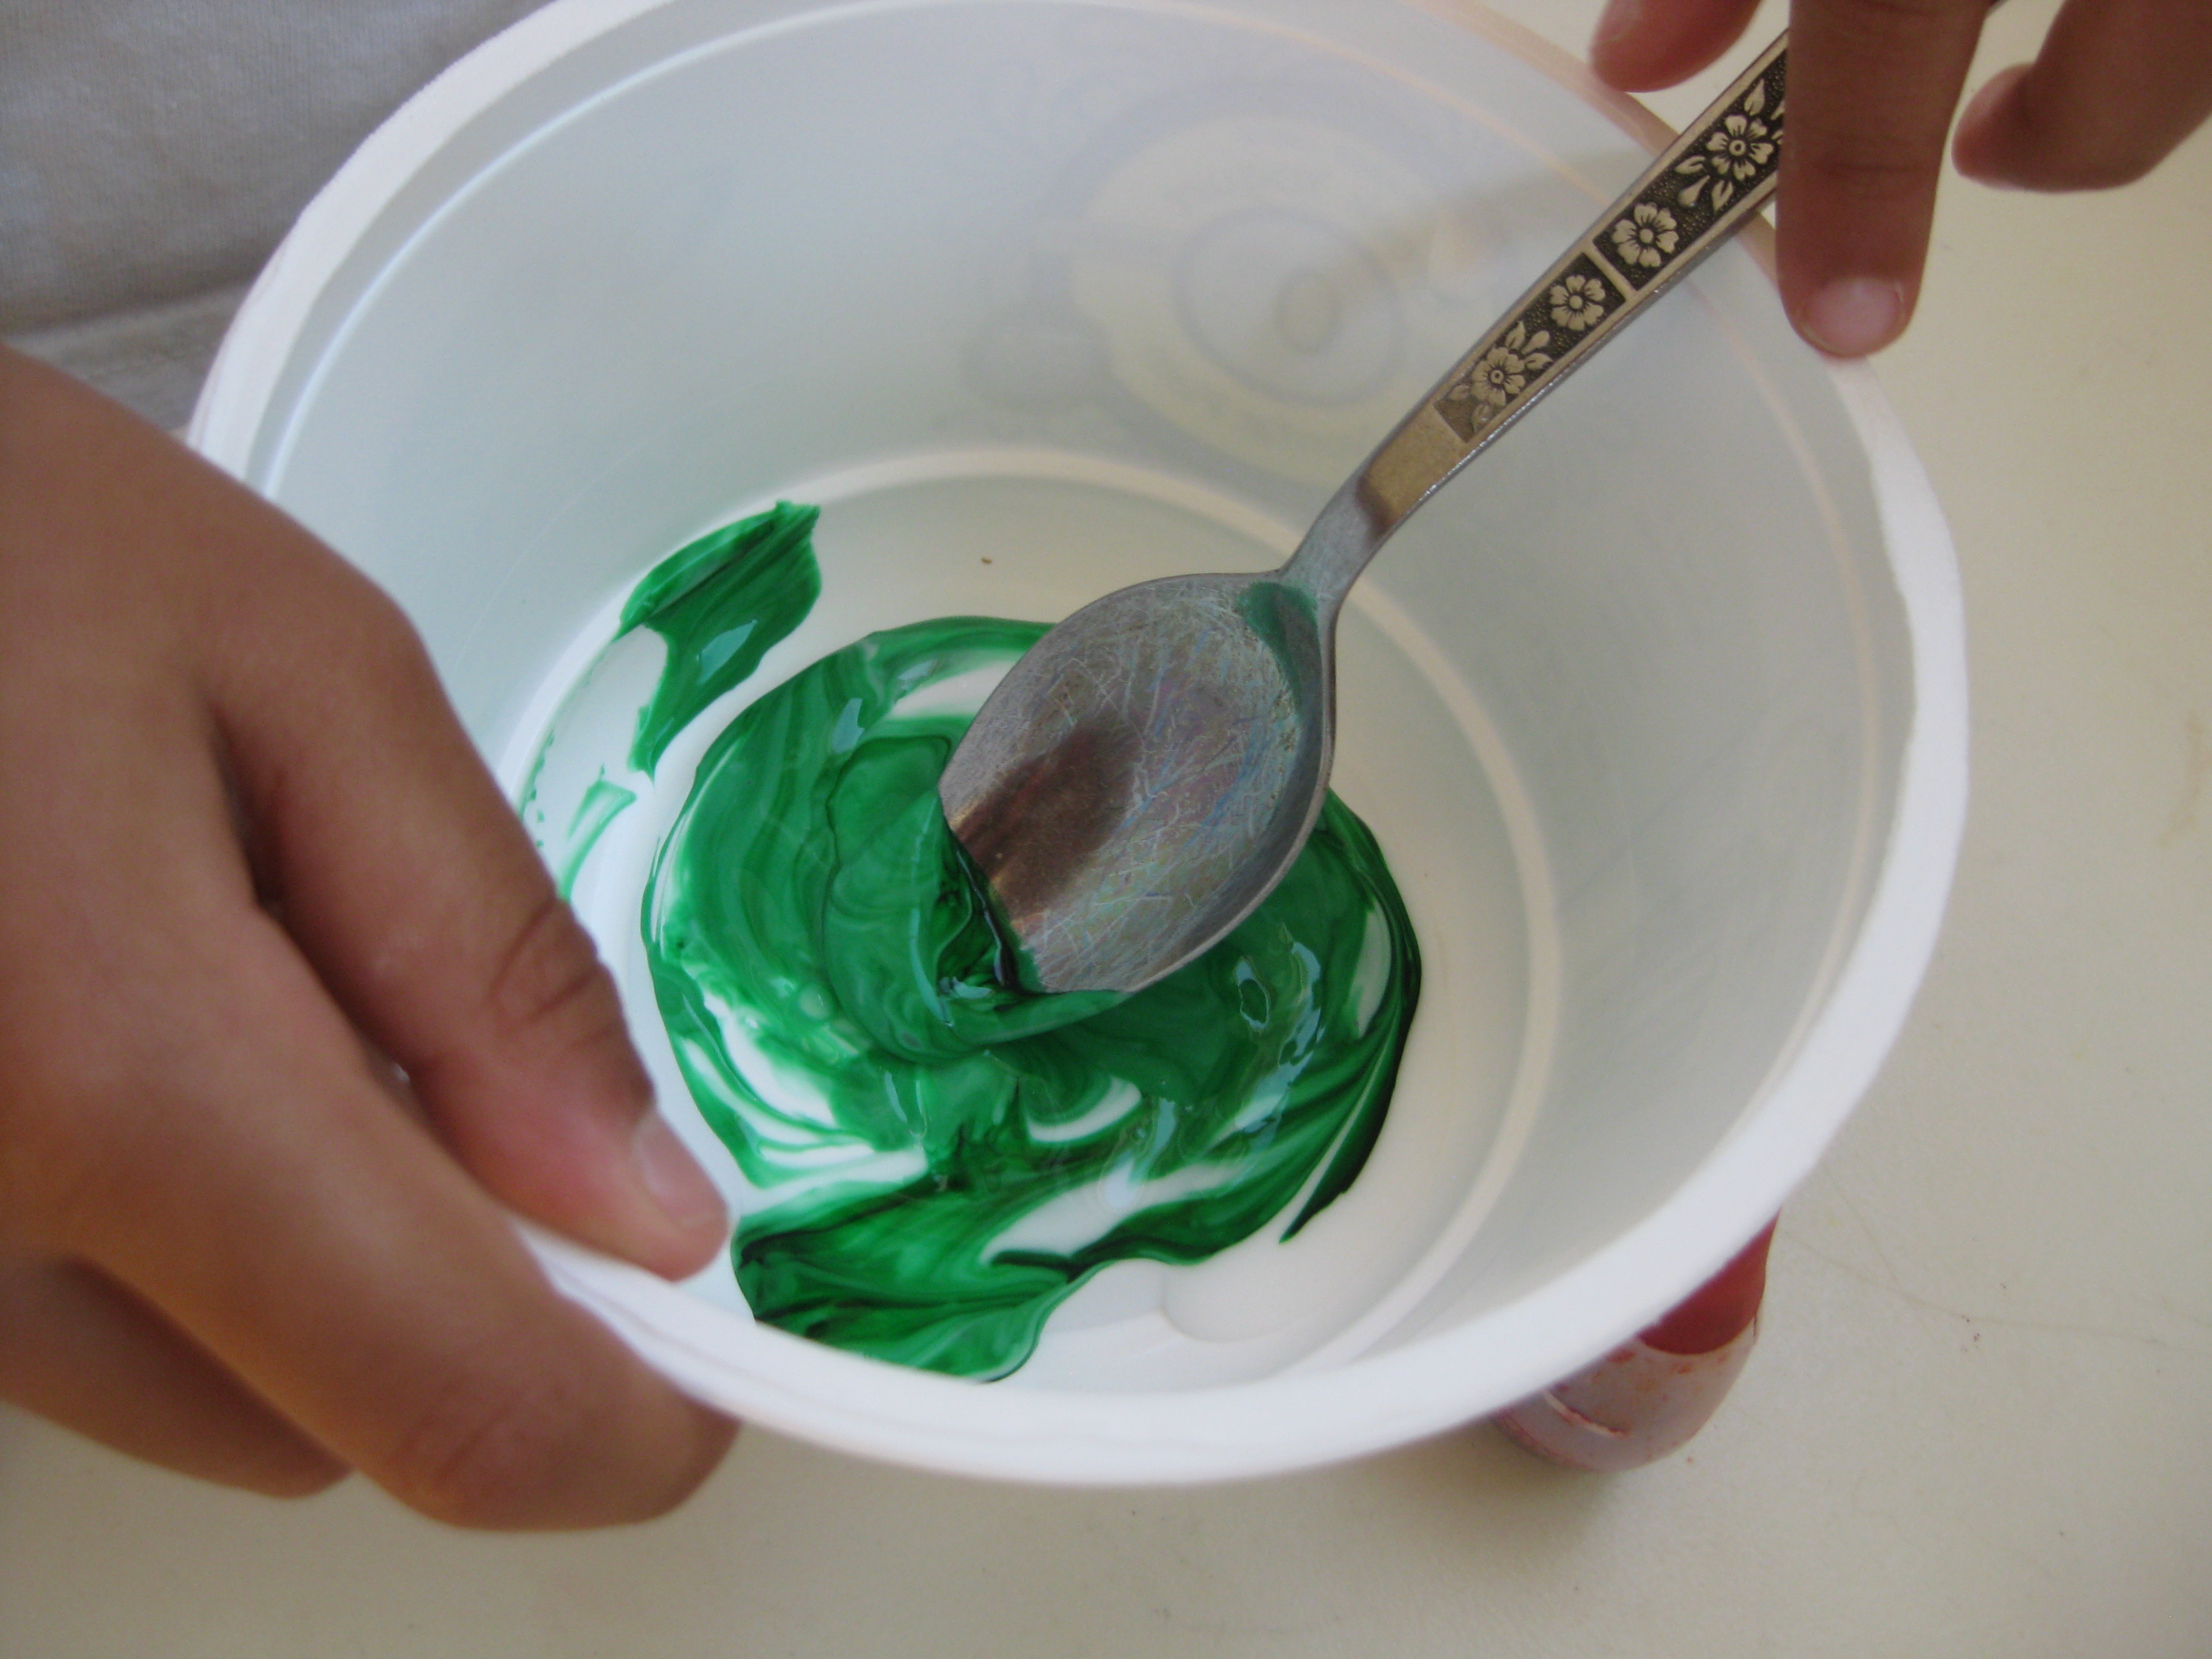 What happens when you mix cornstarch and water?